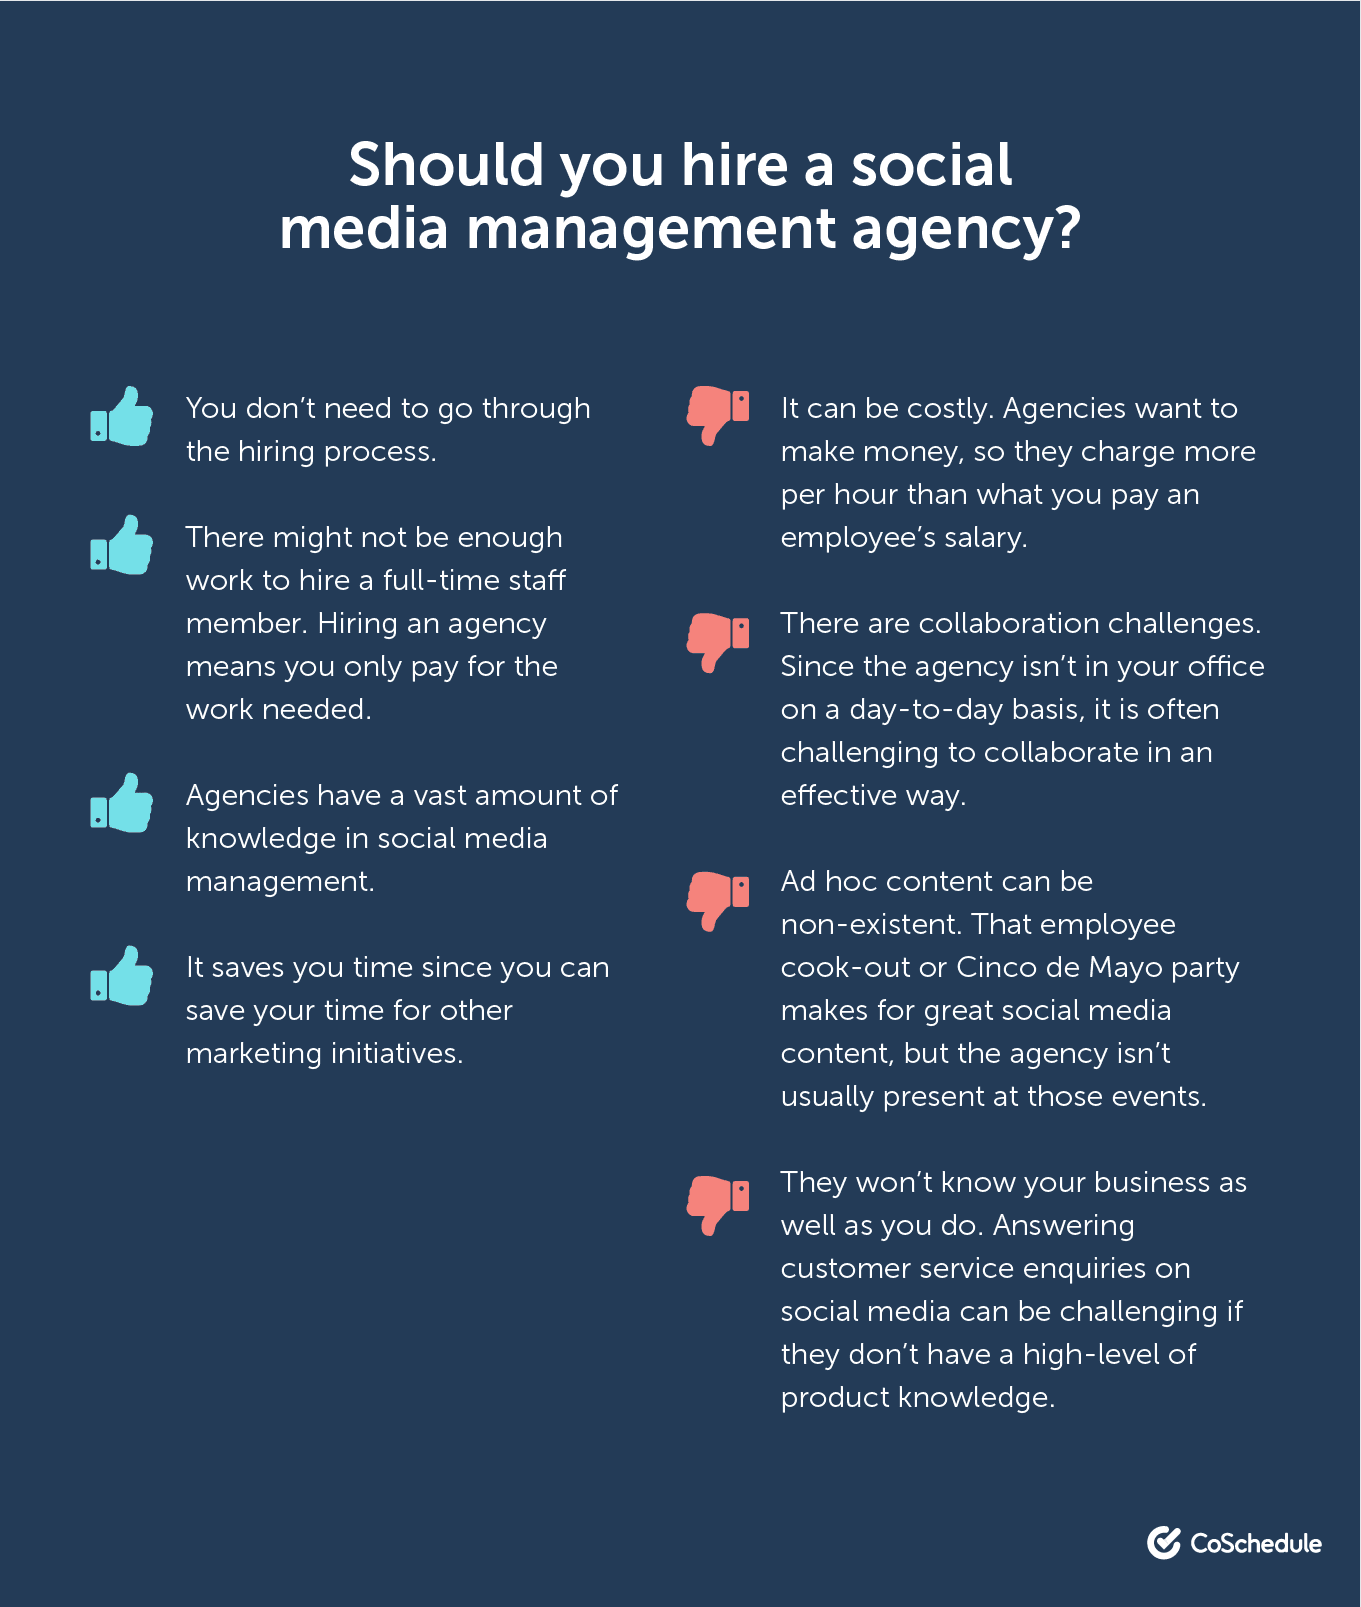 Pros and cons of hiring a social media manager